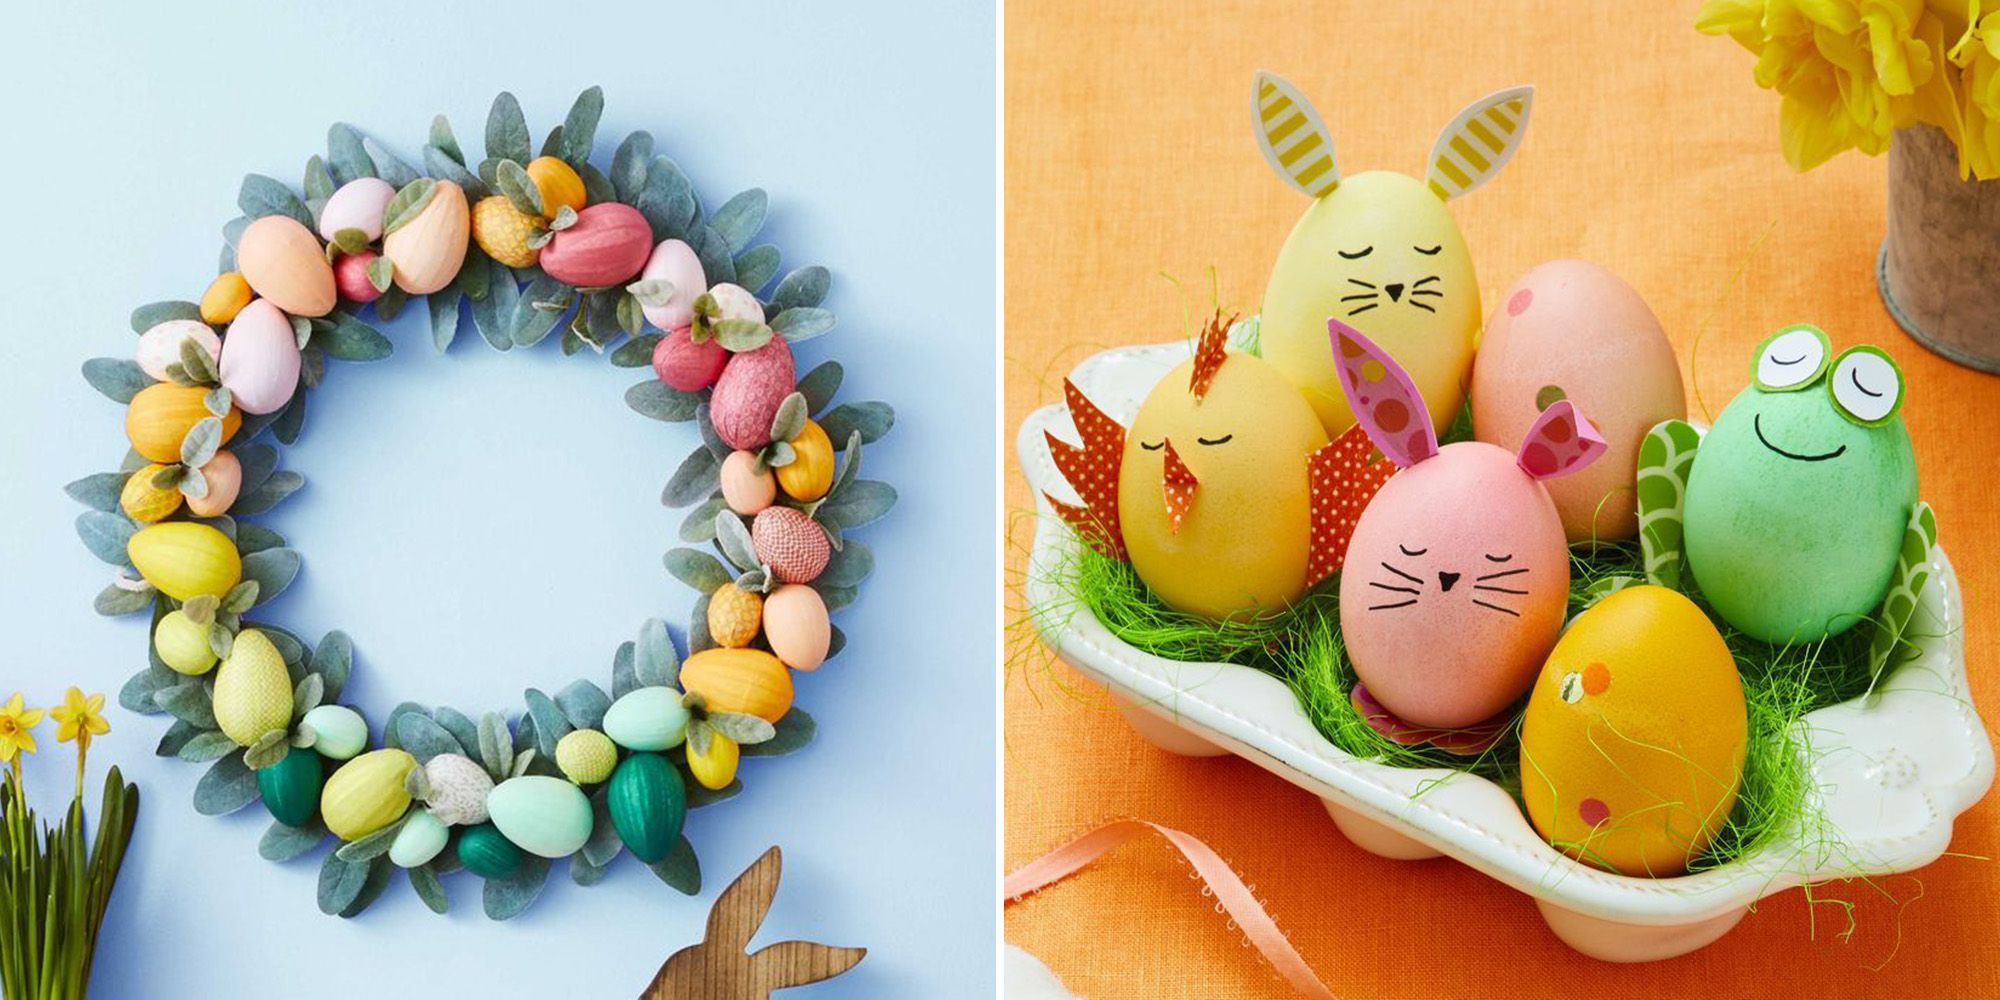 52 DIY Easter Crafts for Adults and Kids — Easy Easter Art Projects for Families pic